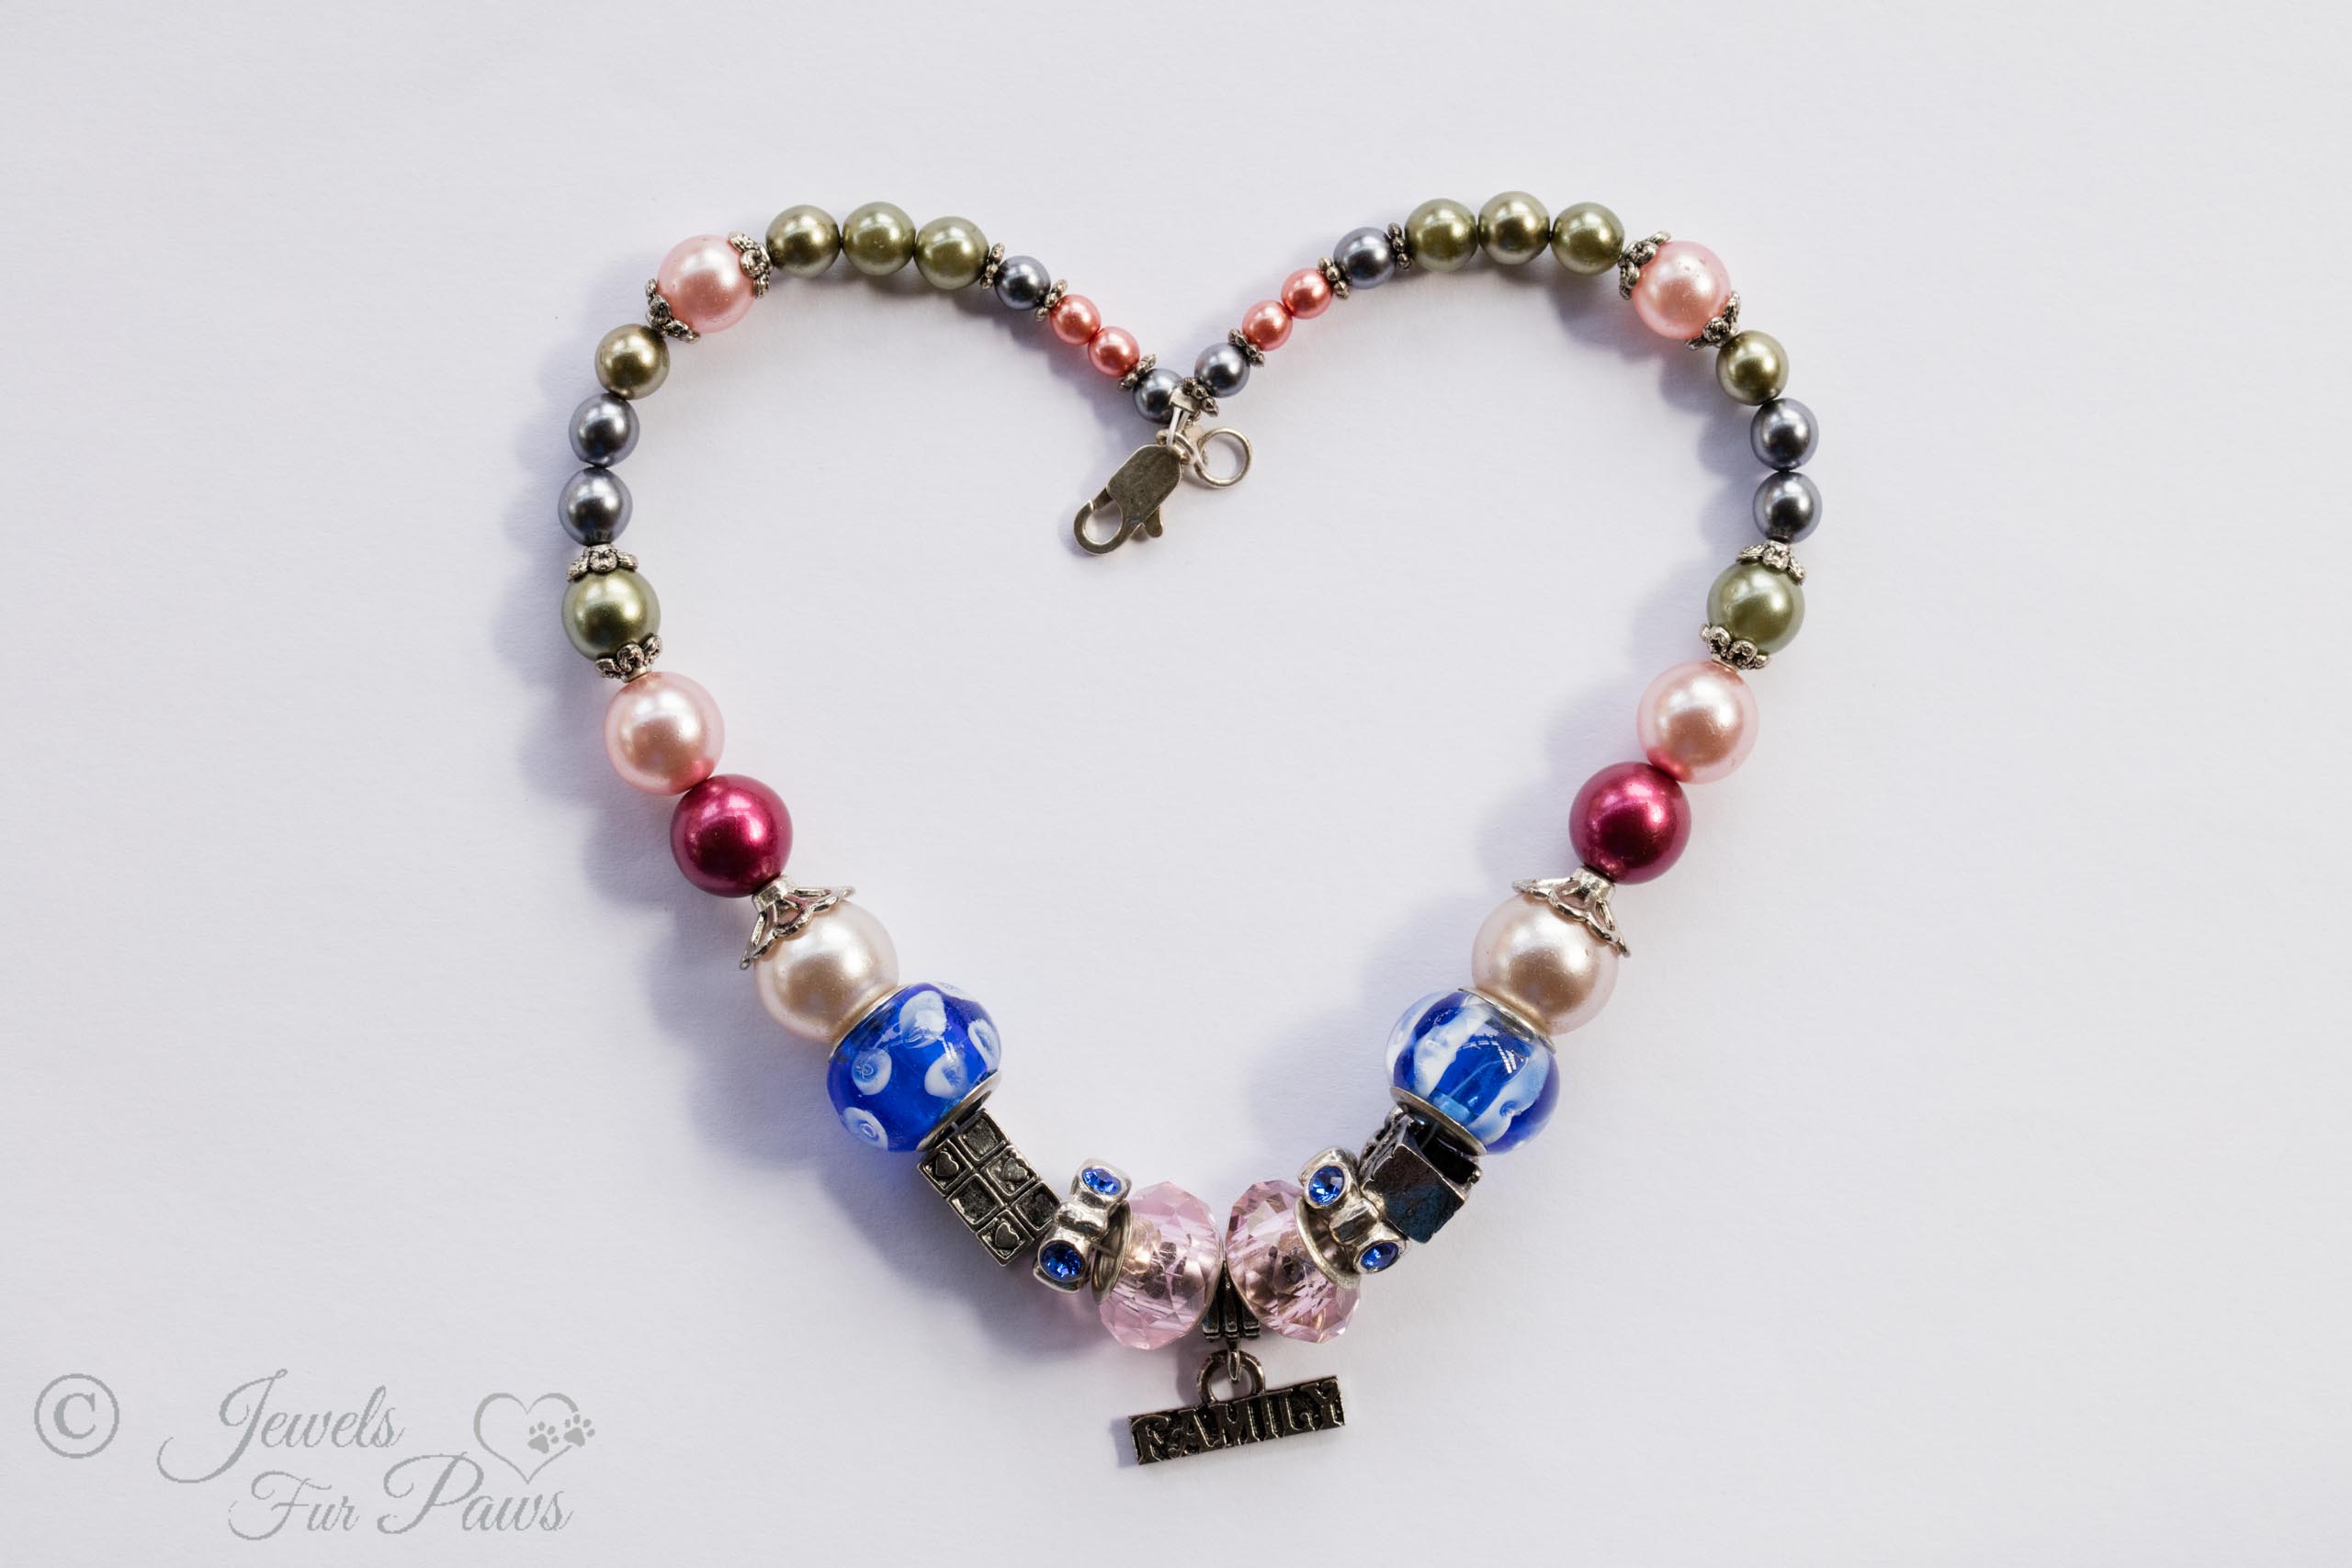 large pink faceted czech crystals with rhinstone rhondells, blue murano glass beads, pink pearls, gray pearls on white background